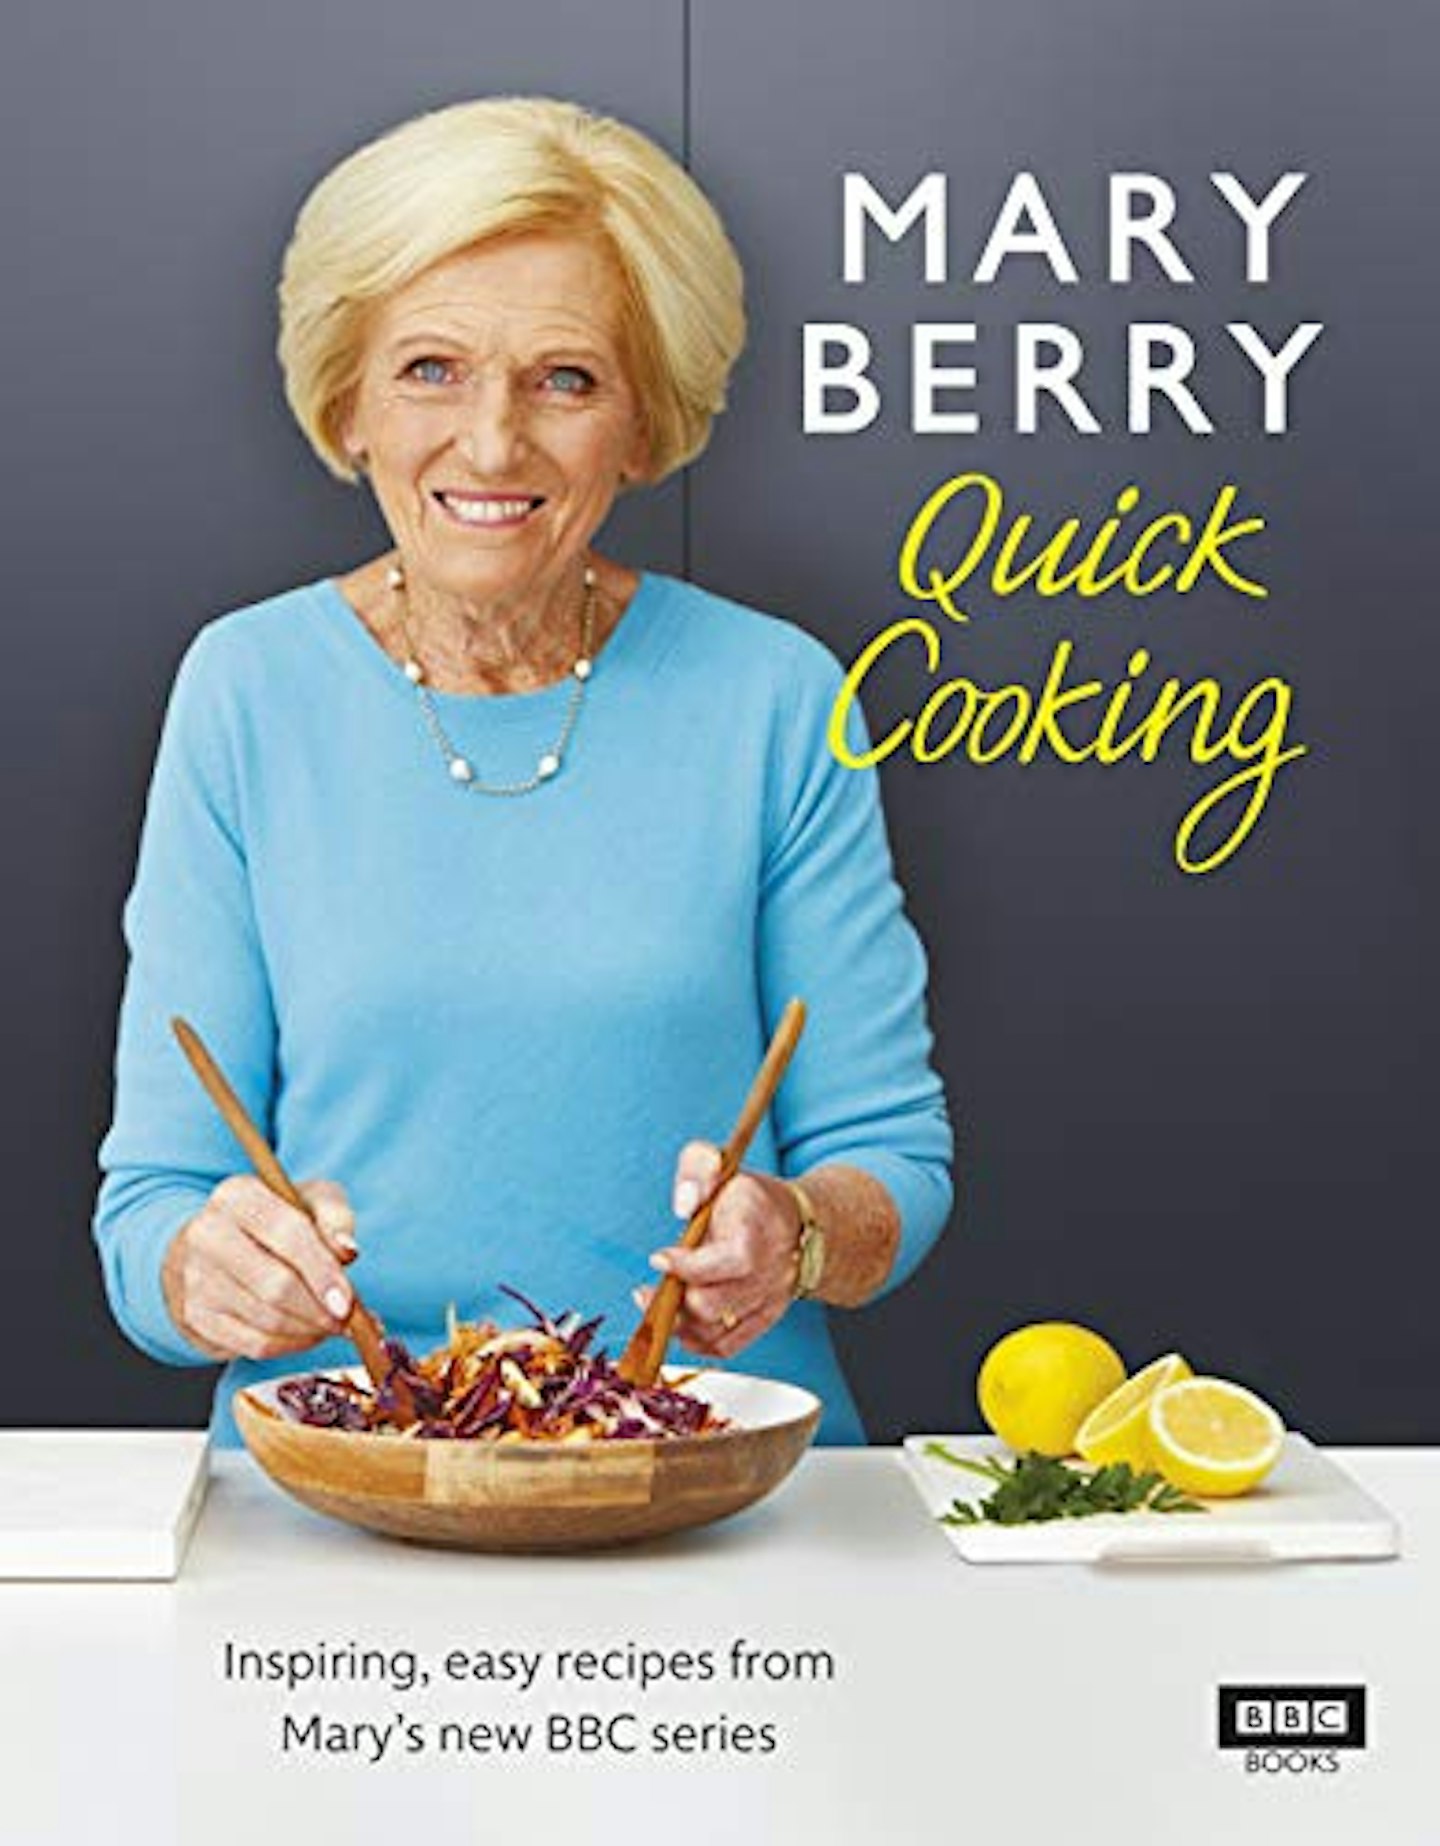 Mary Berryu2019s Quick Cooking